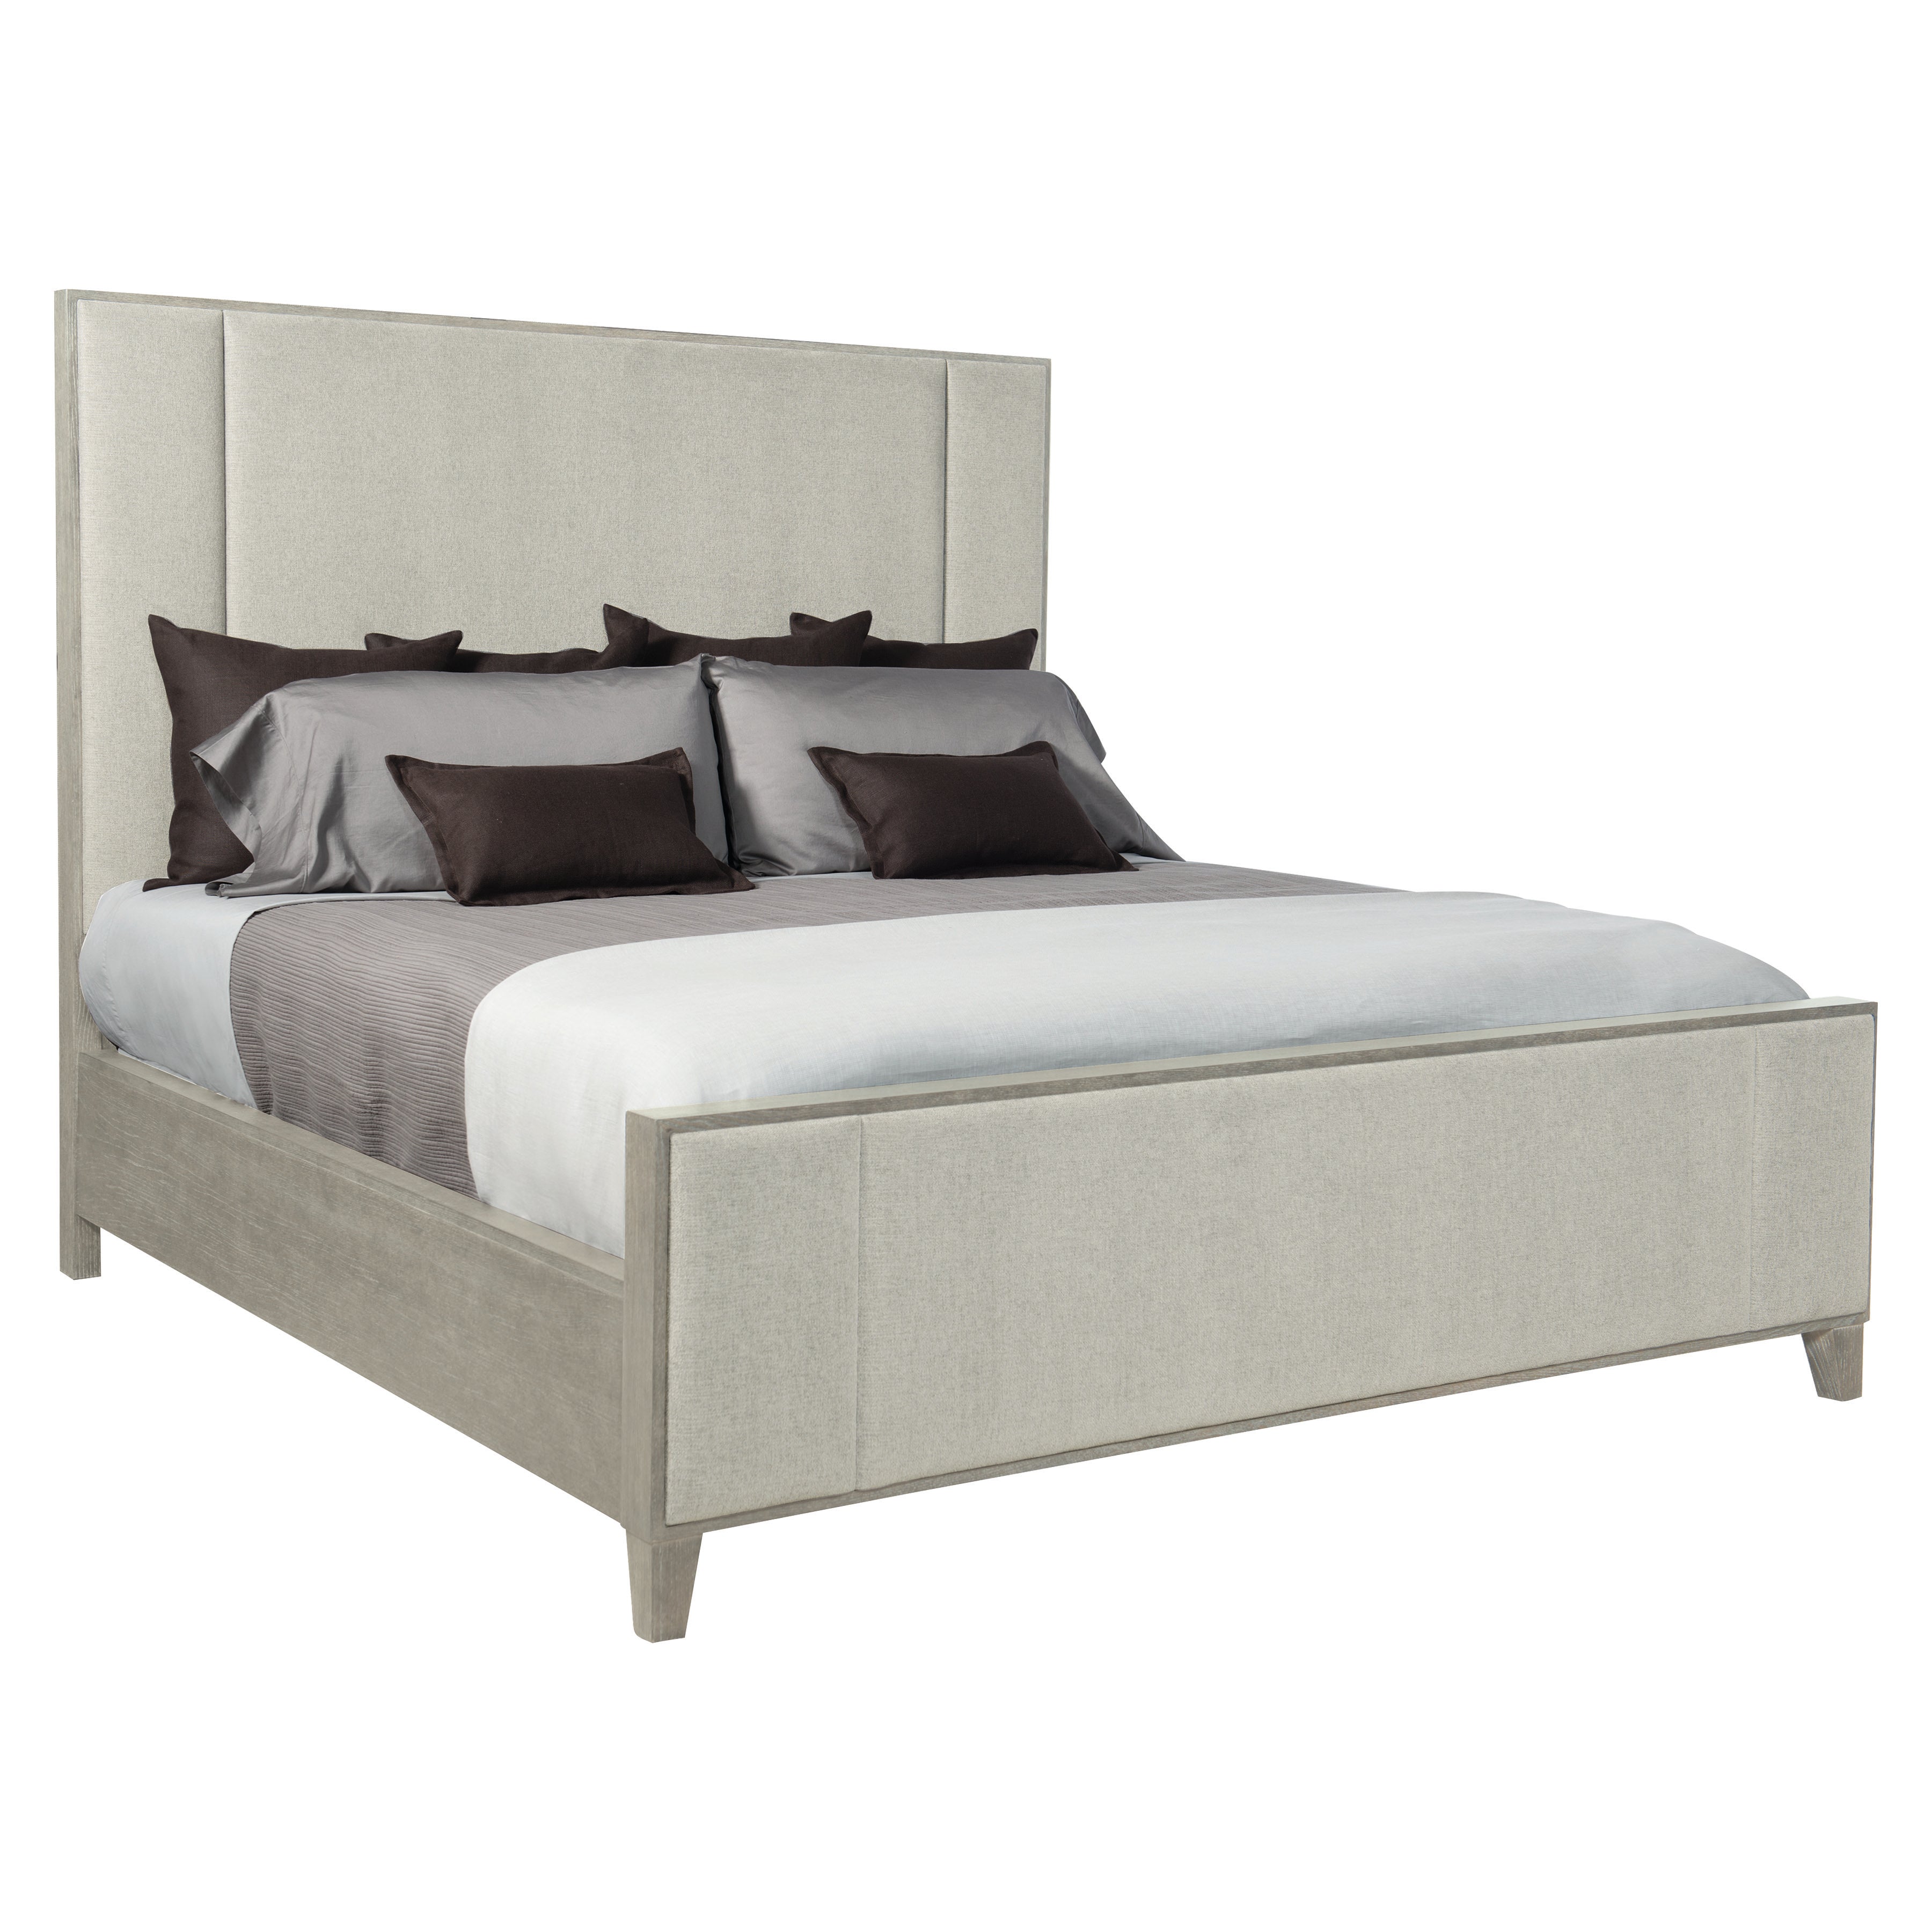 Linea King Panel Bed with Upholstered Headboard and Footboard in Cerused Greige Finish